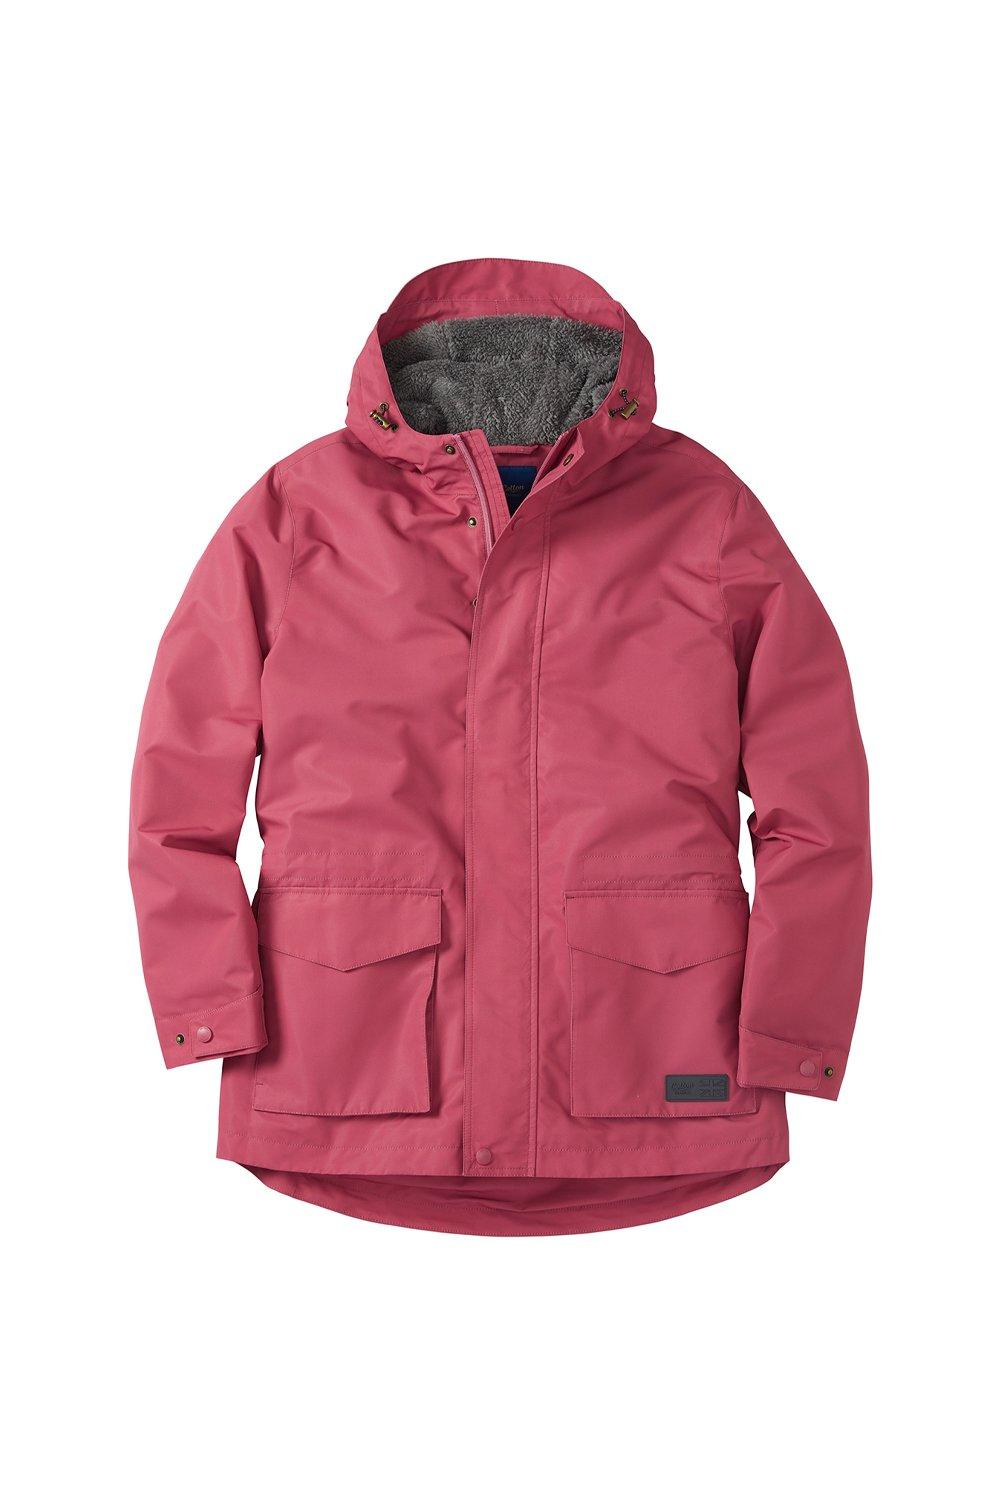 Stormproof Fleece-Lined Jacket at Cotton Traders